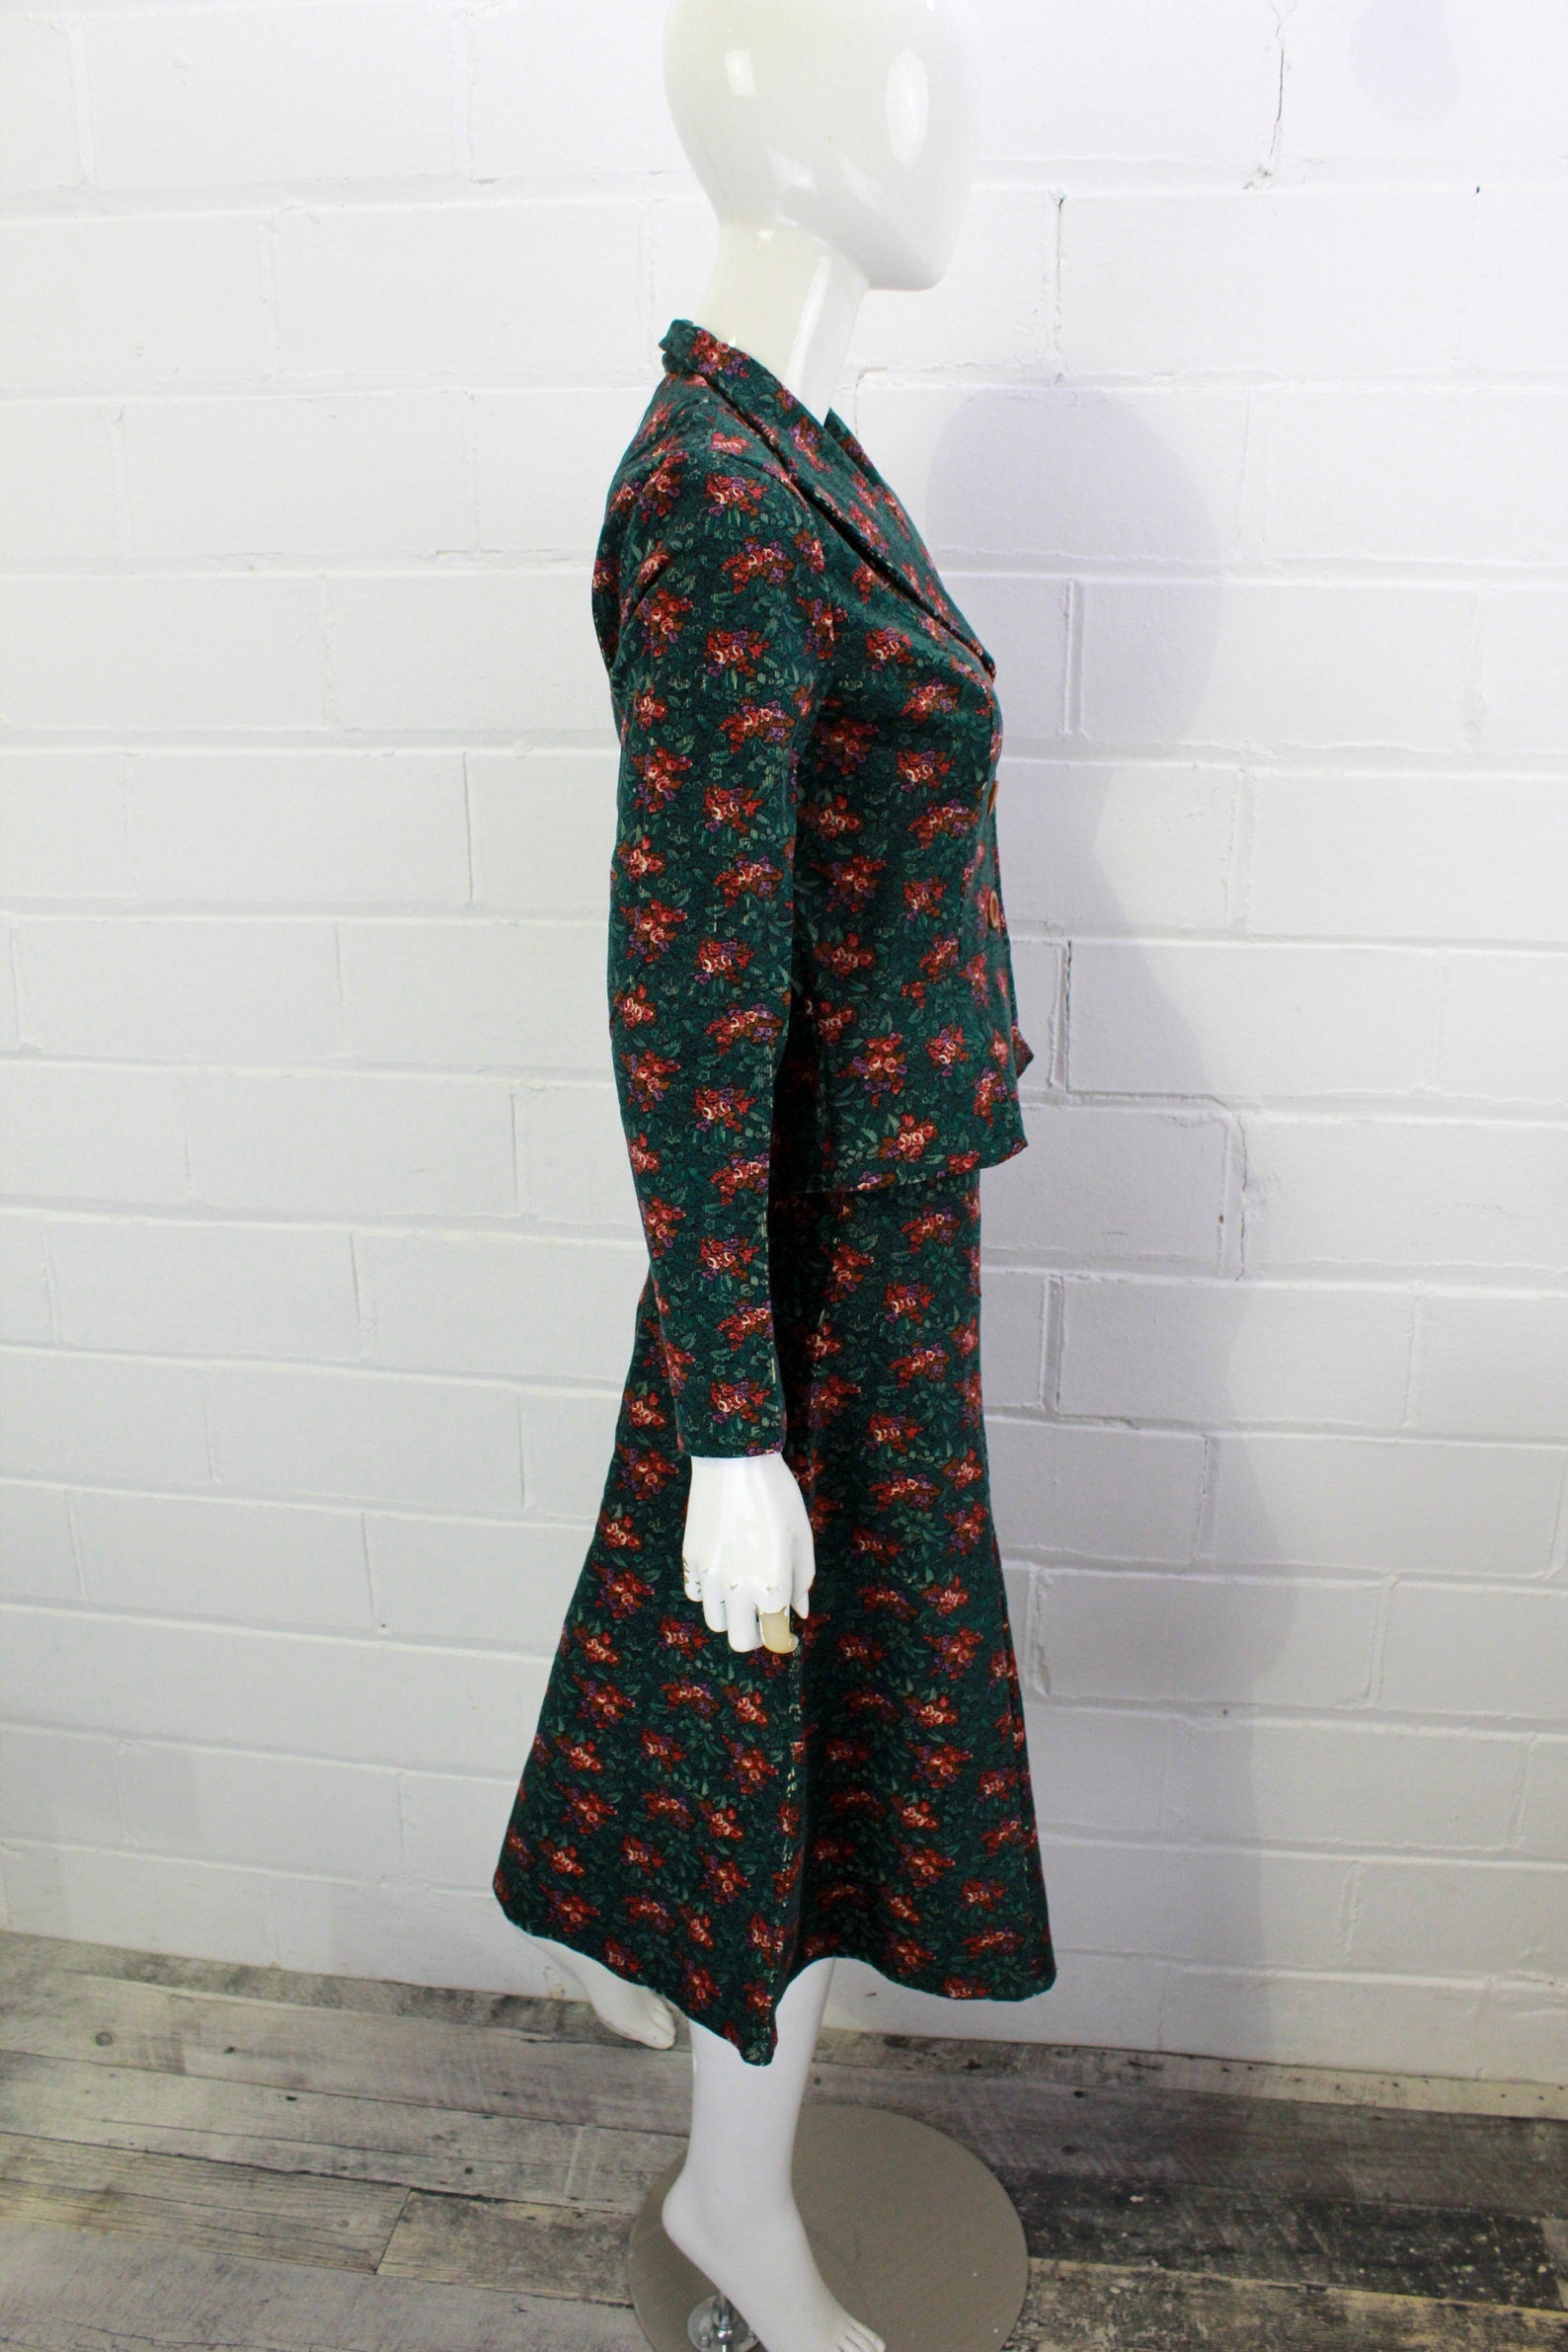 Vintage 1970s Corduroy Skirt Suit, Blazer and A-line Skirt, Teal Floral Print Corduroy, Deadstock, Small